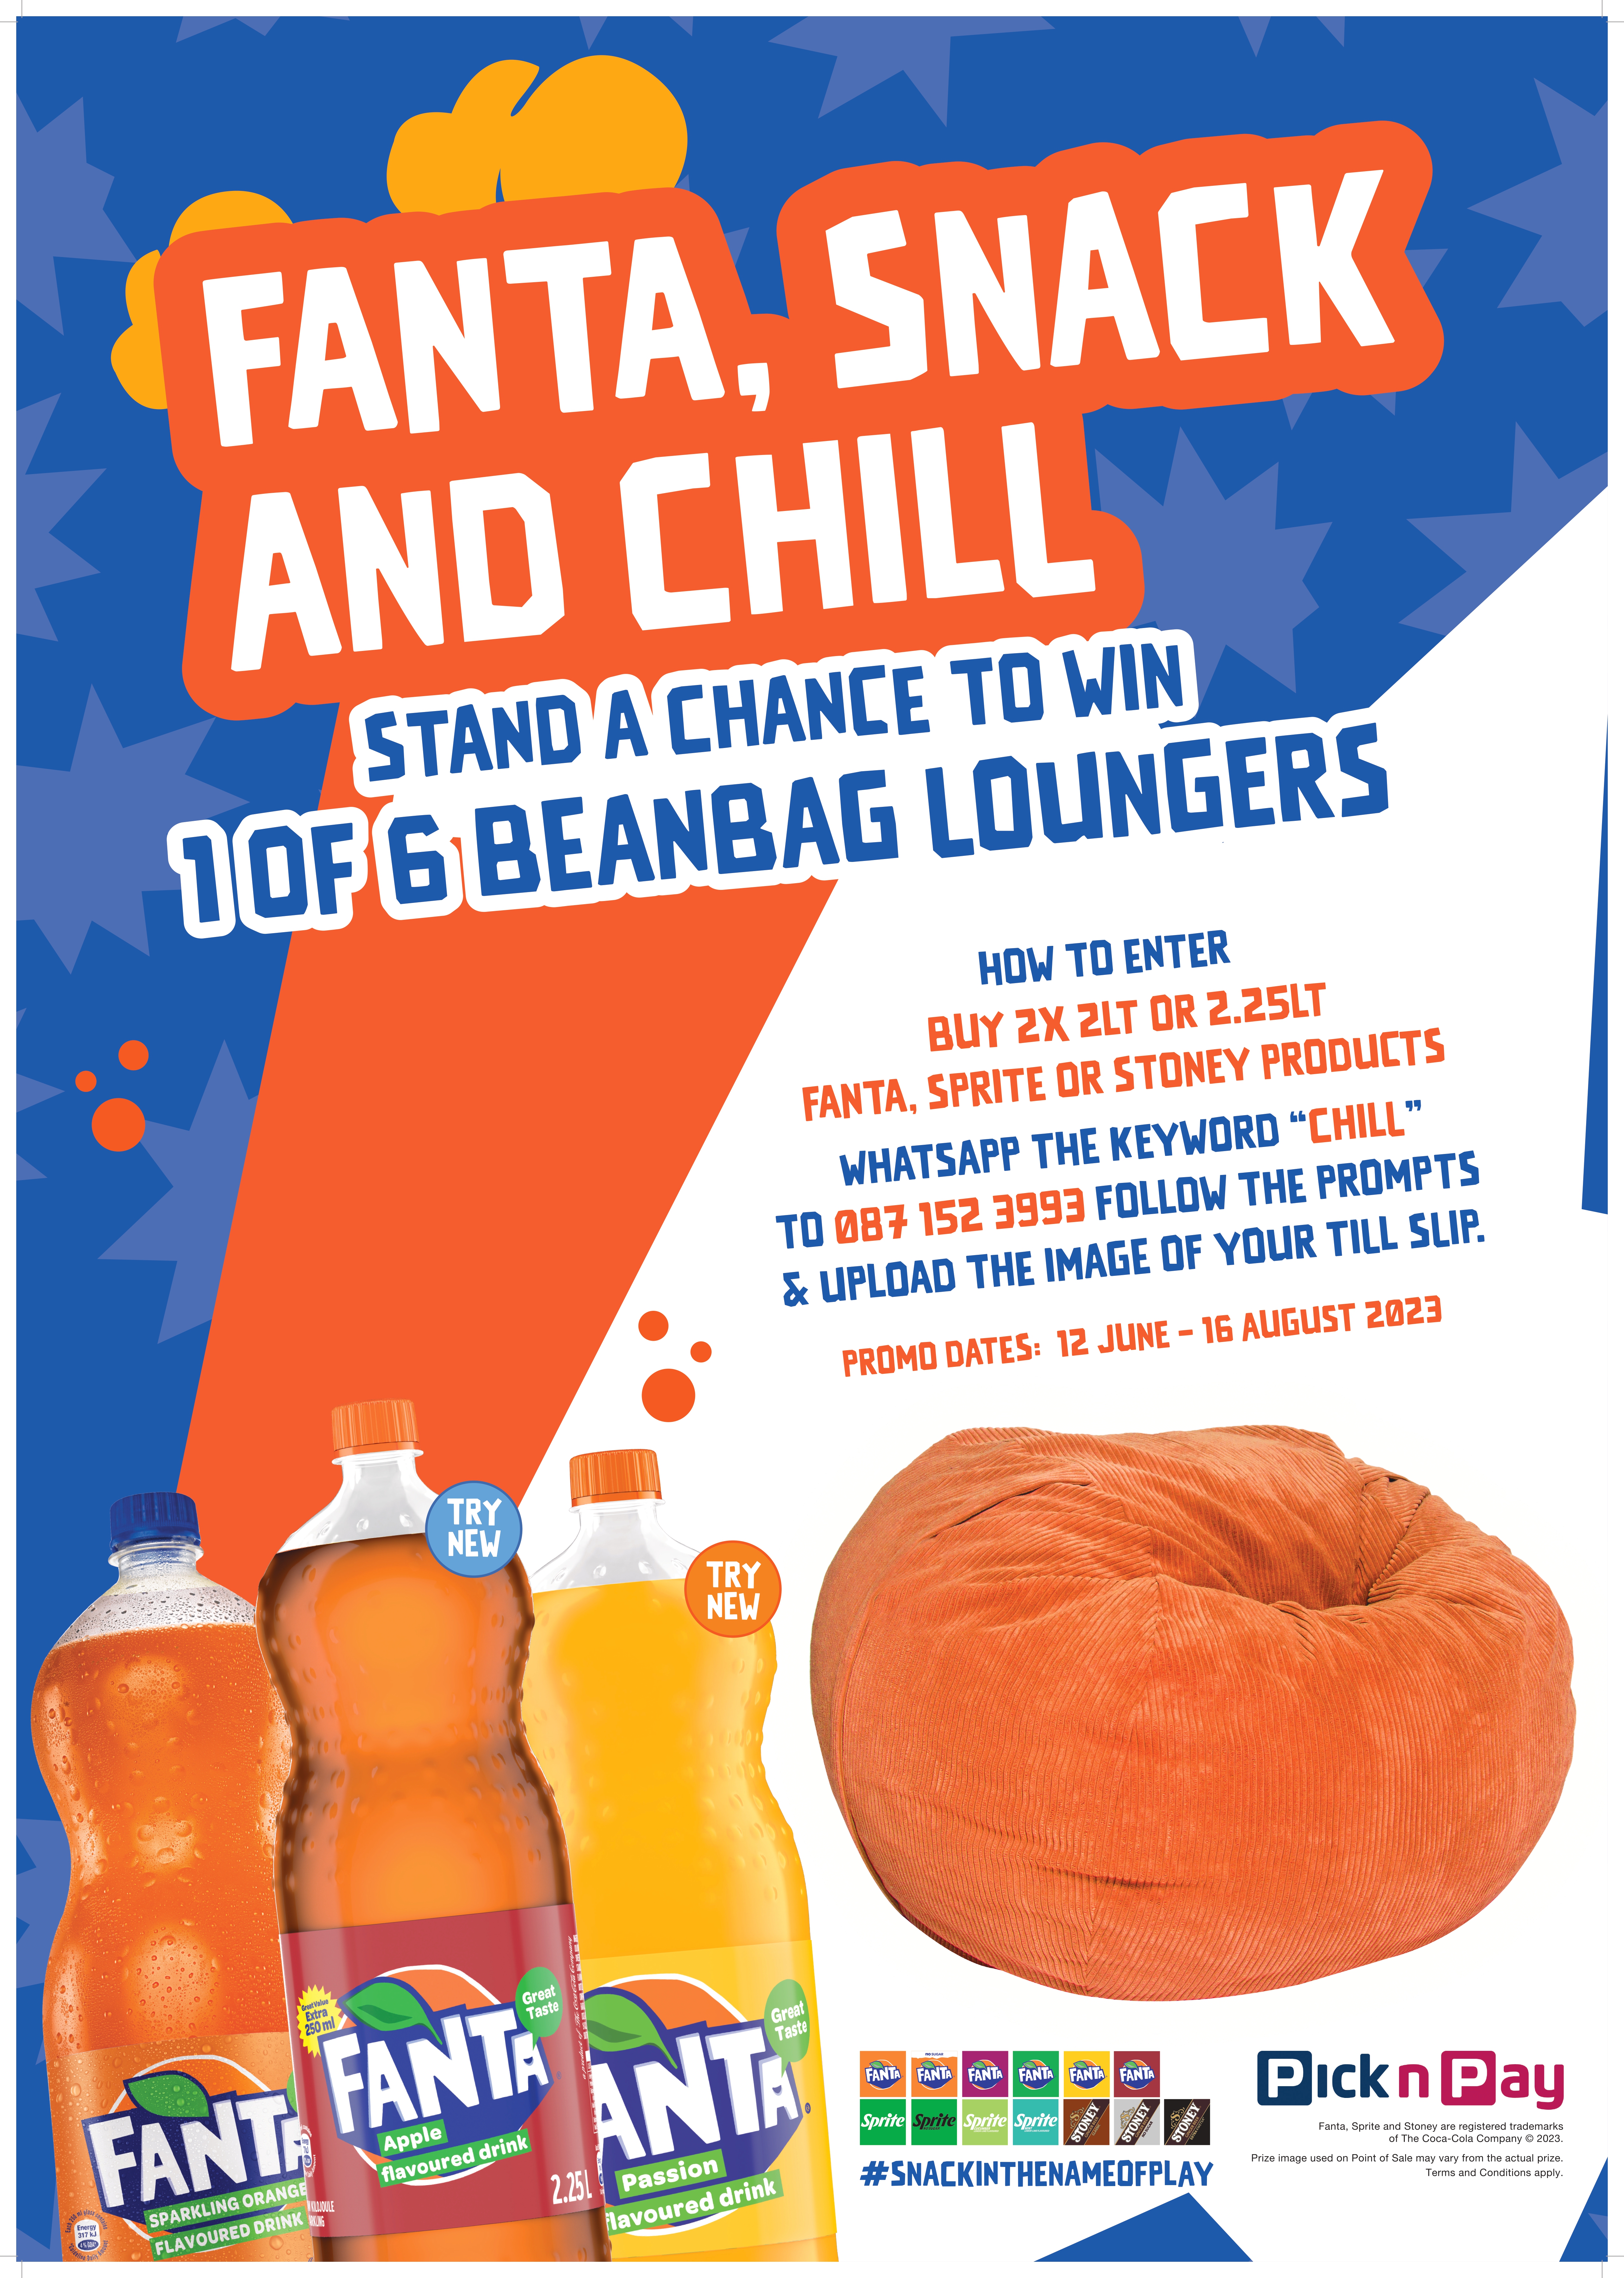  STAND A CHANCE TO WI 1 OF 6 BEANBAG LOUNGER VALUED AT R3990